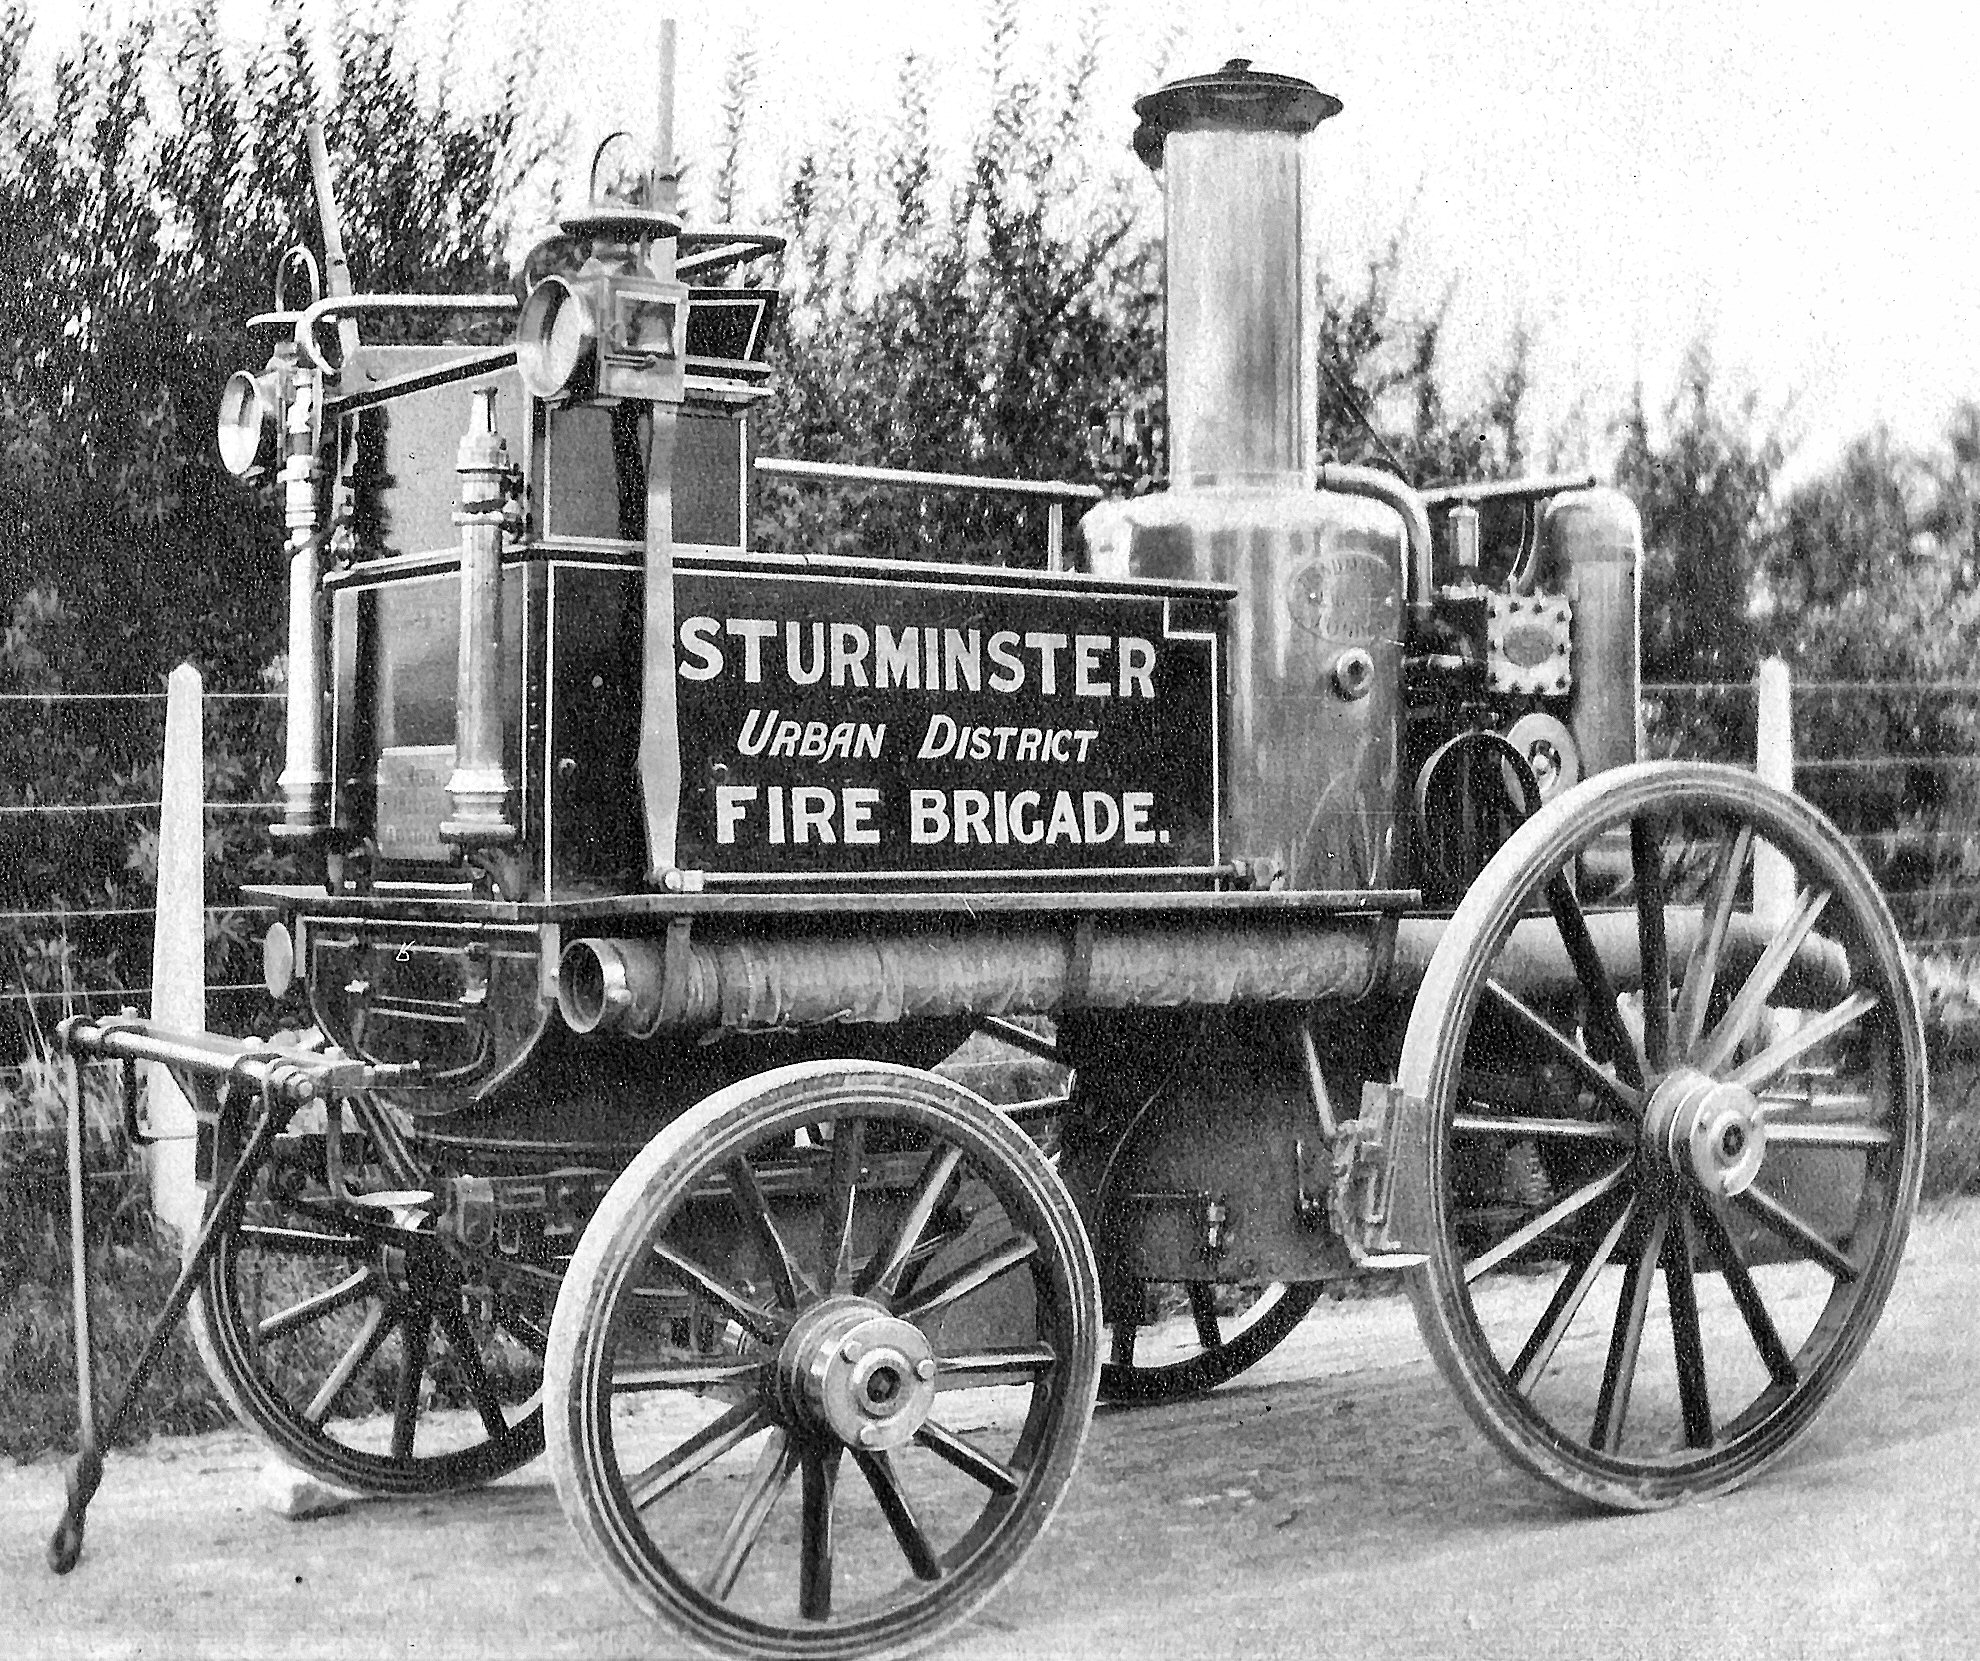 Glimpse One of Sturminster’s early fire engines, acquired from the late Lord Portman at Bryanston in 1925.